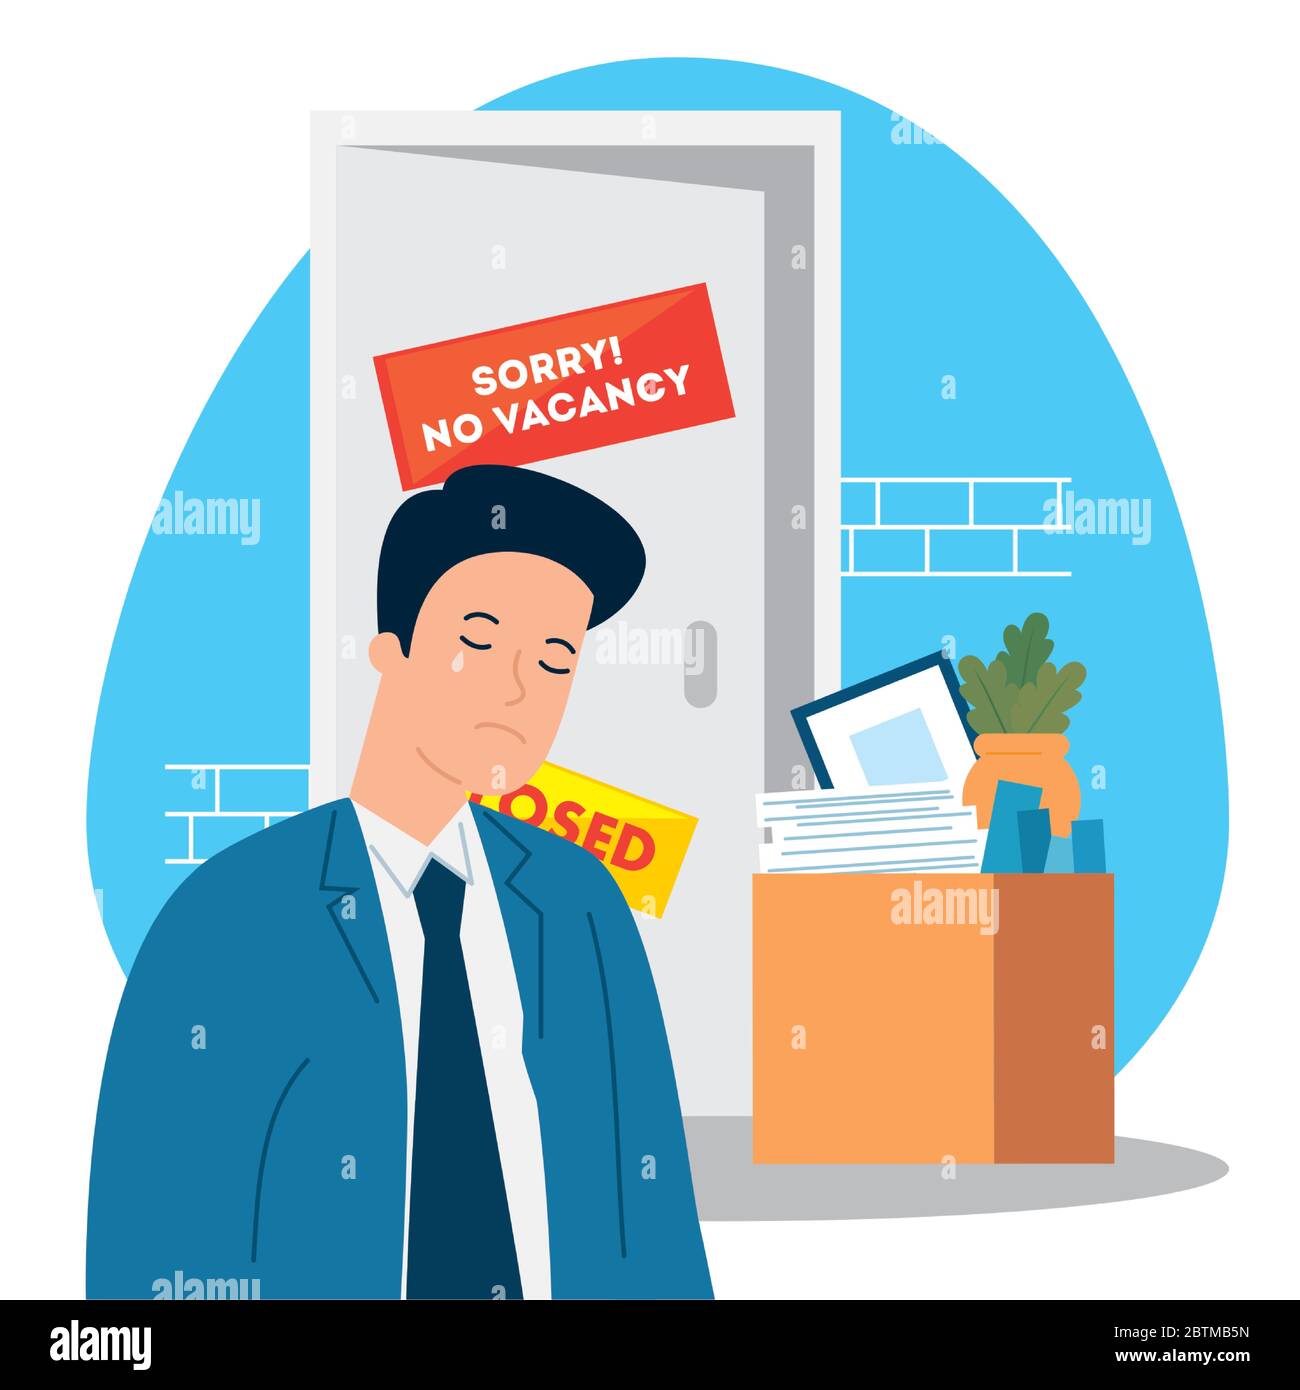 no vacancy, sorry, unemployment coronavirus covid 19, global crisis, man crying and box with objects office Stock Vector